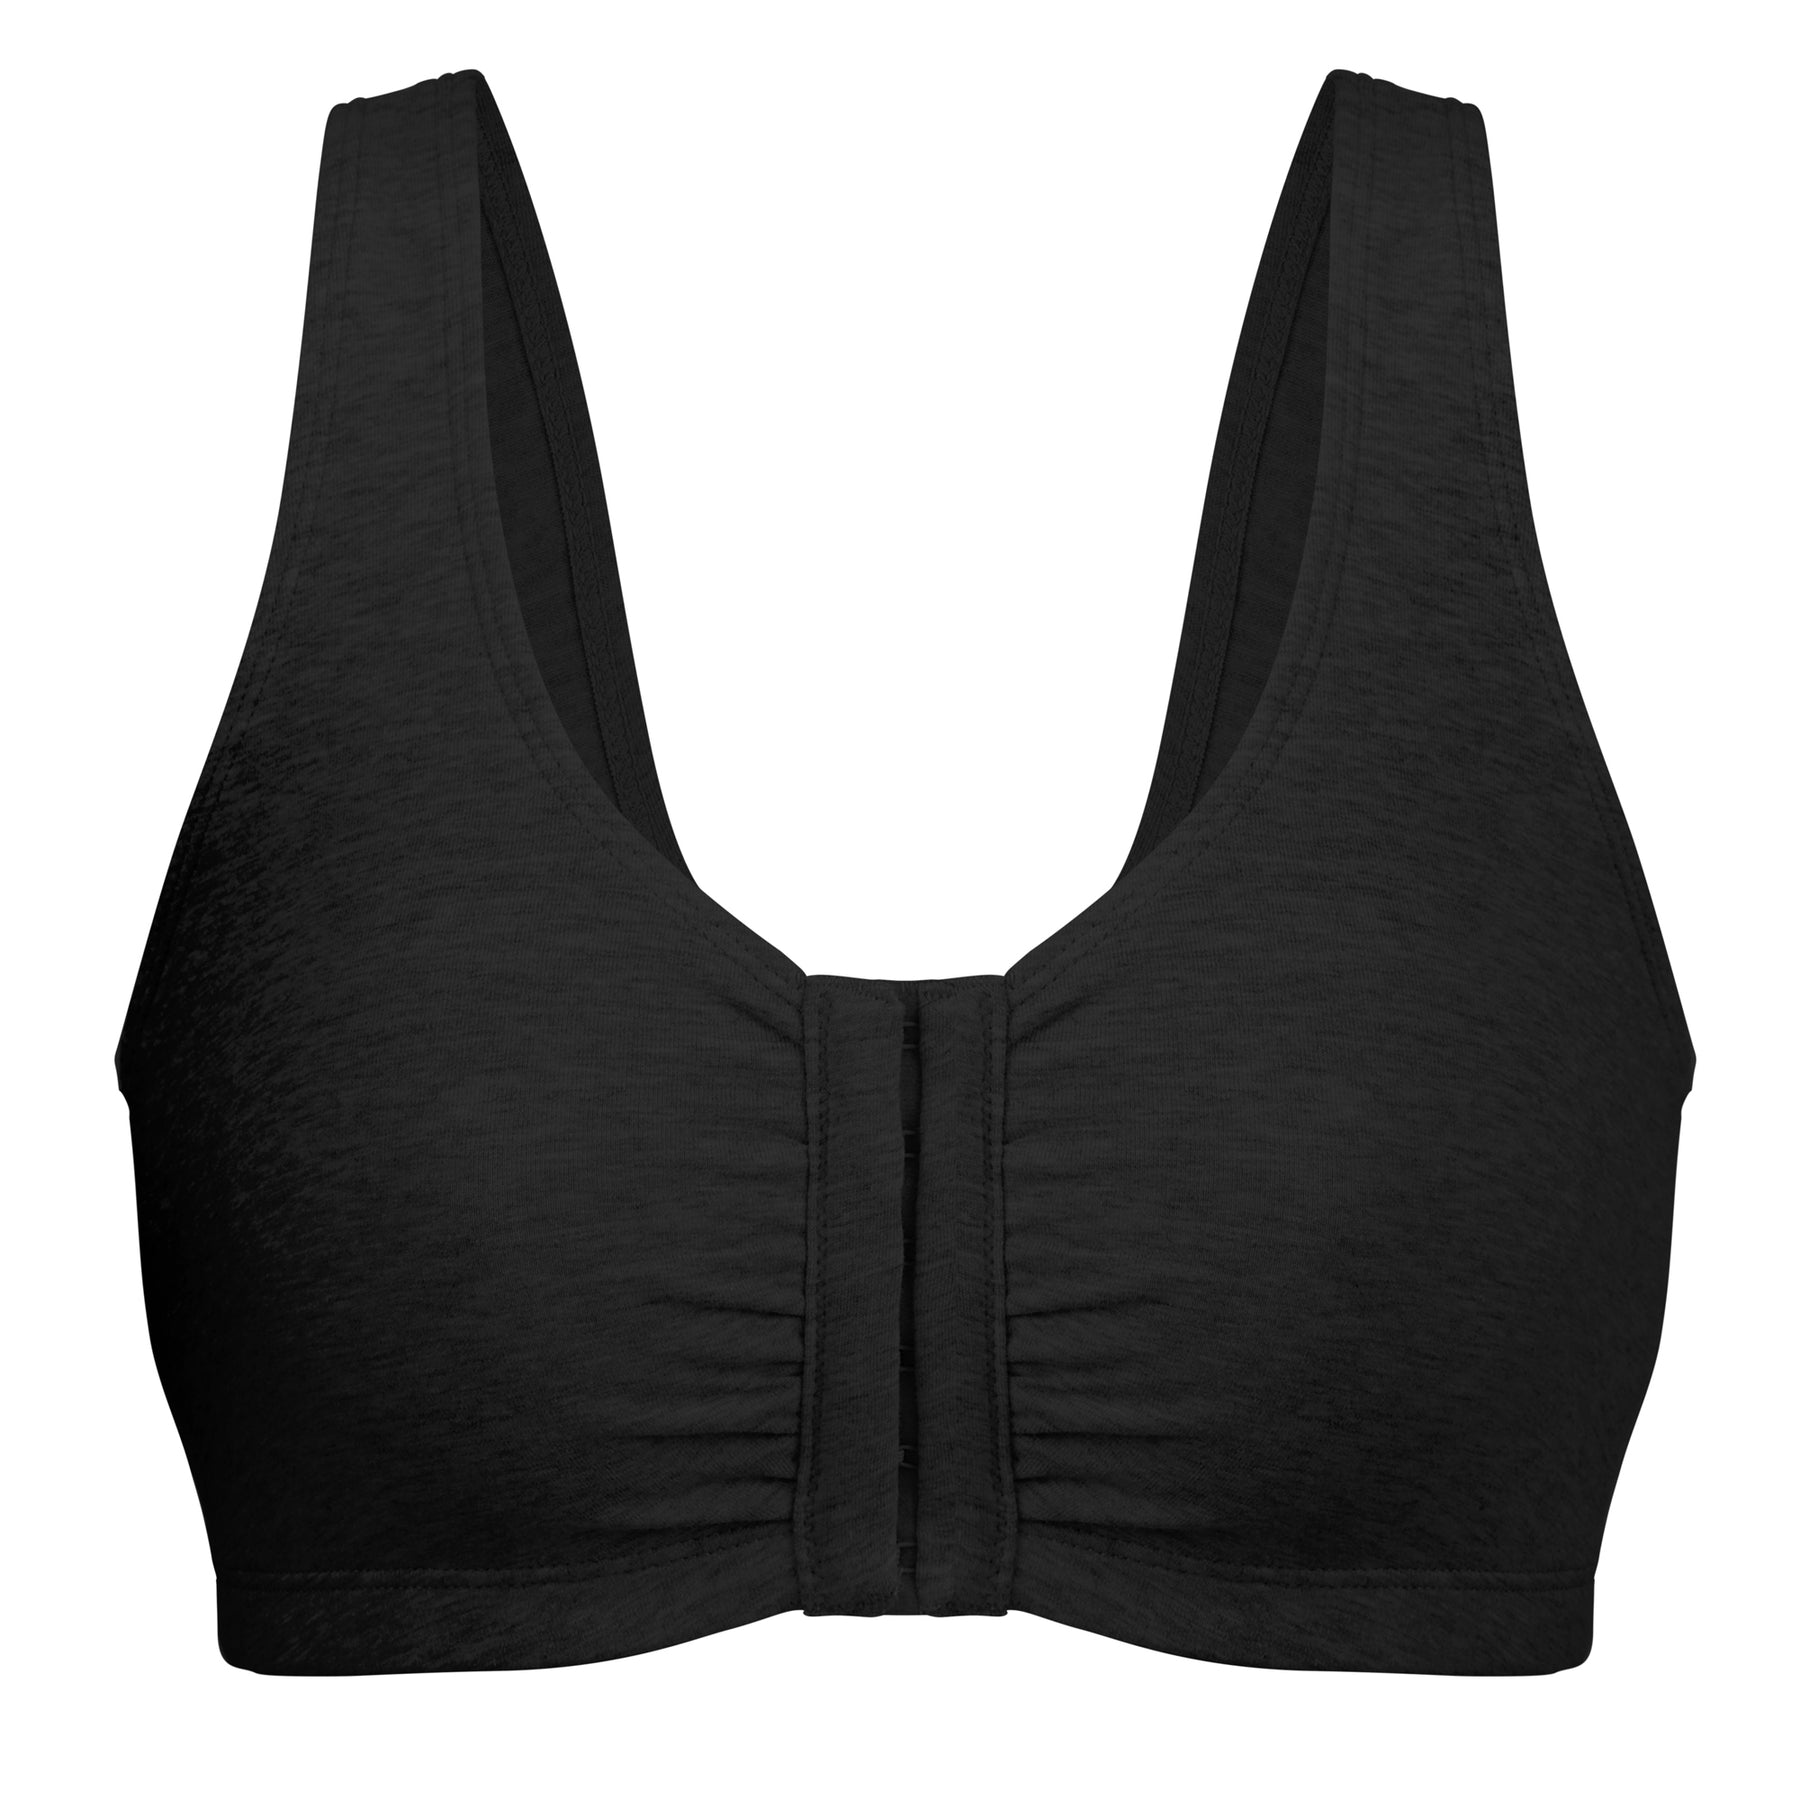 Fruit of the Loom Women's Front Closure Cotton Bra Sports, Opaque